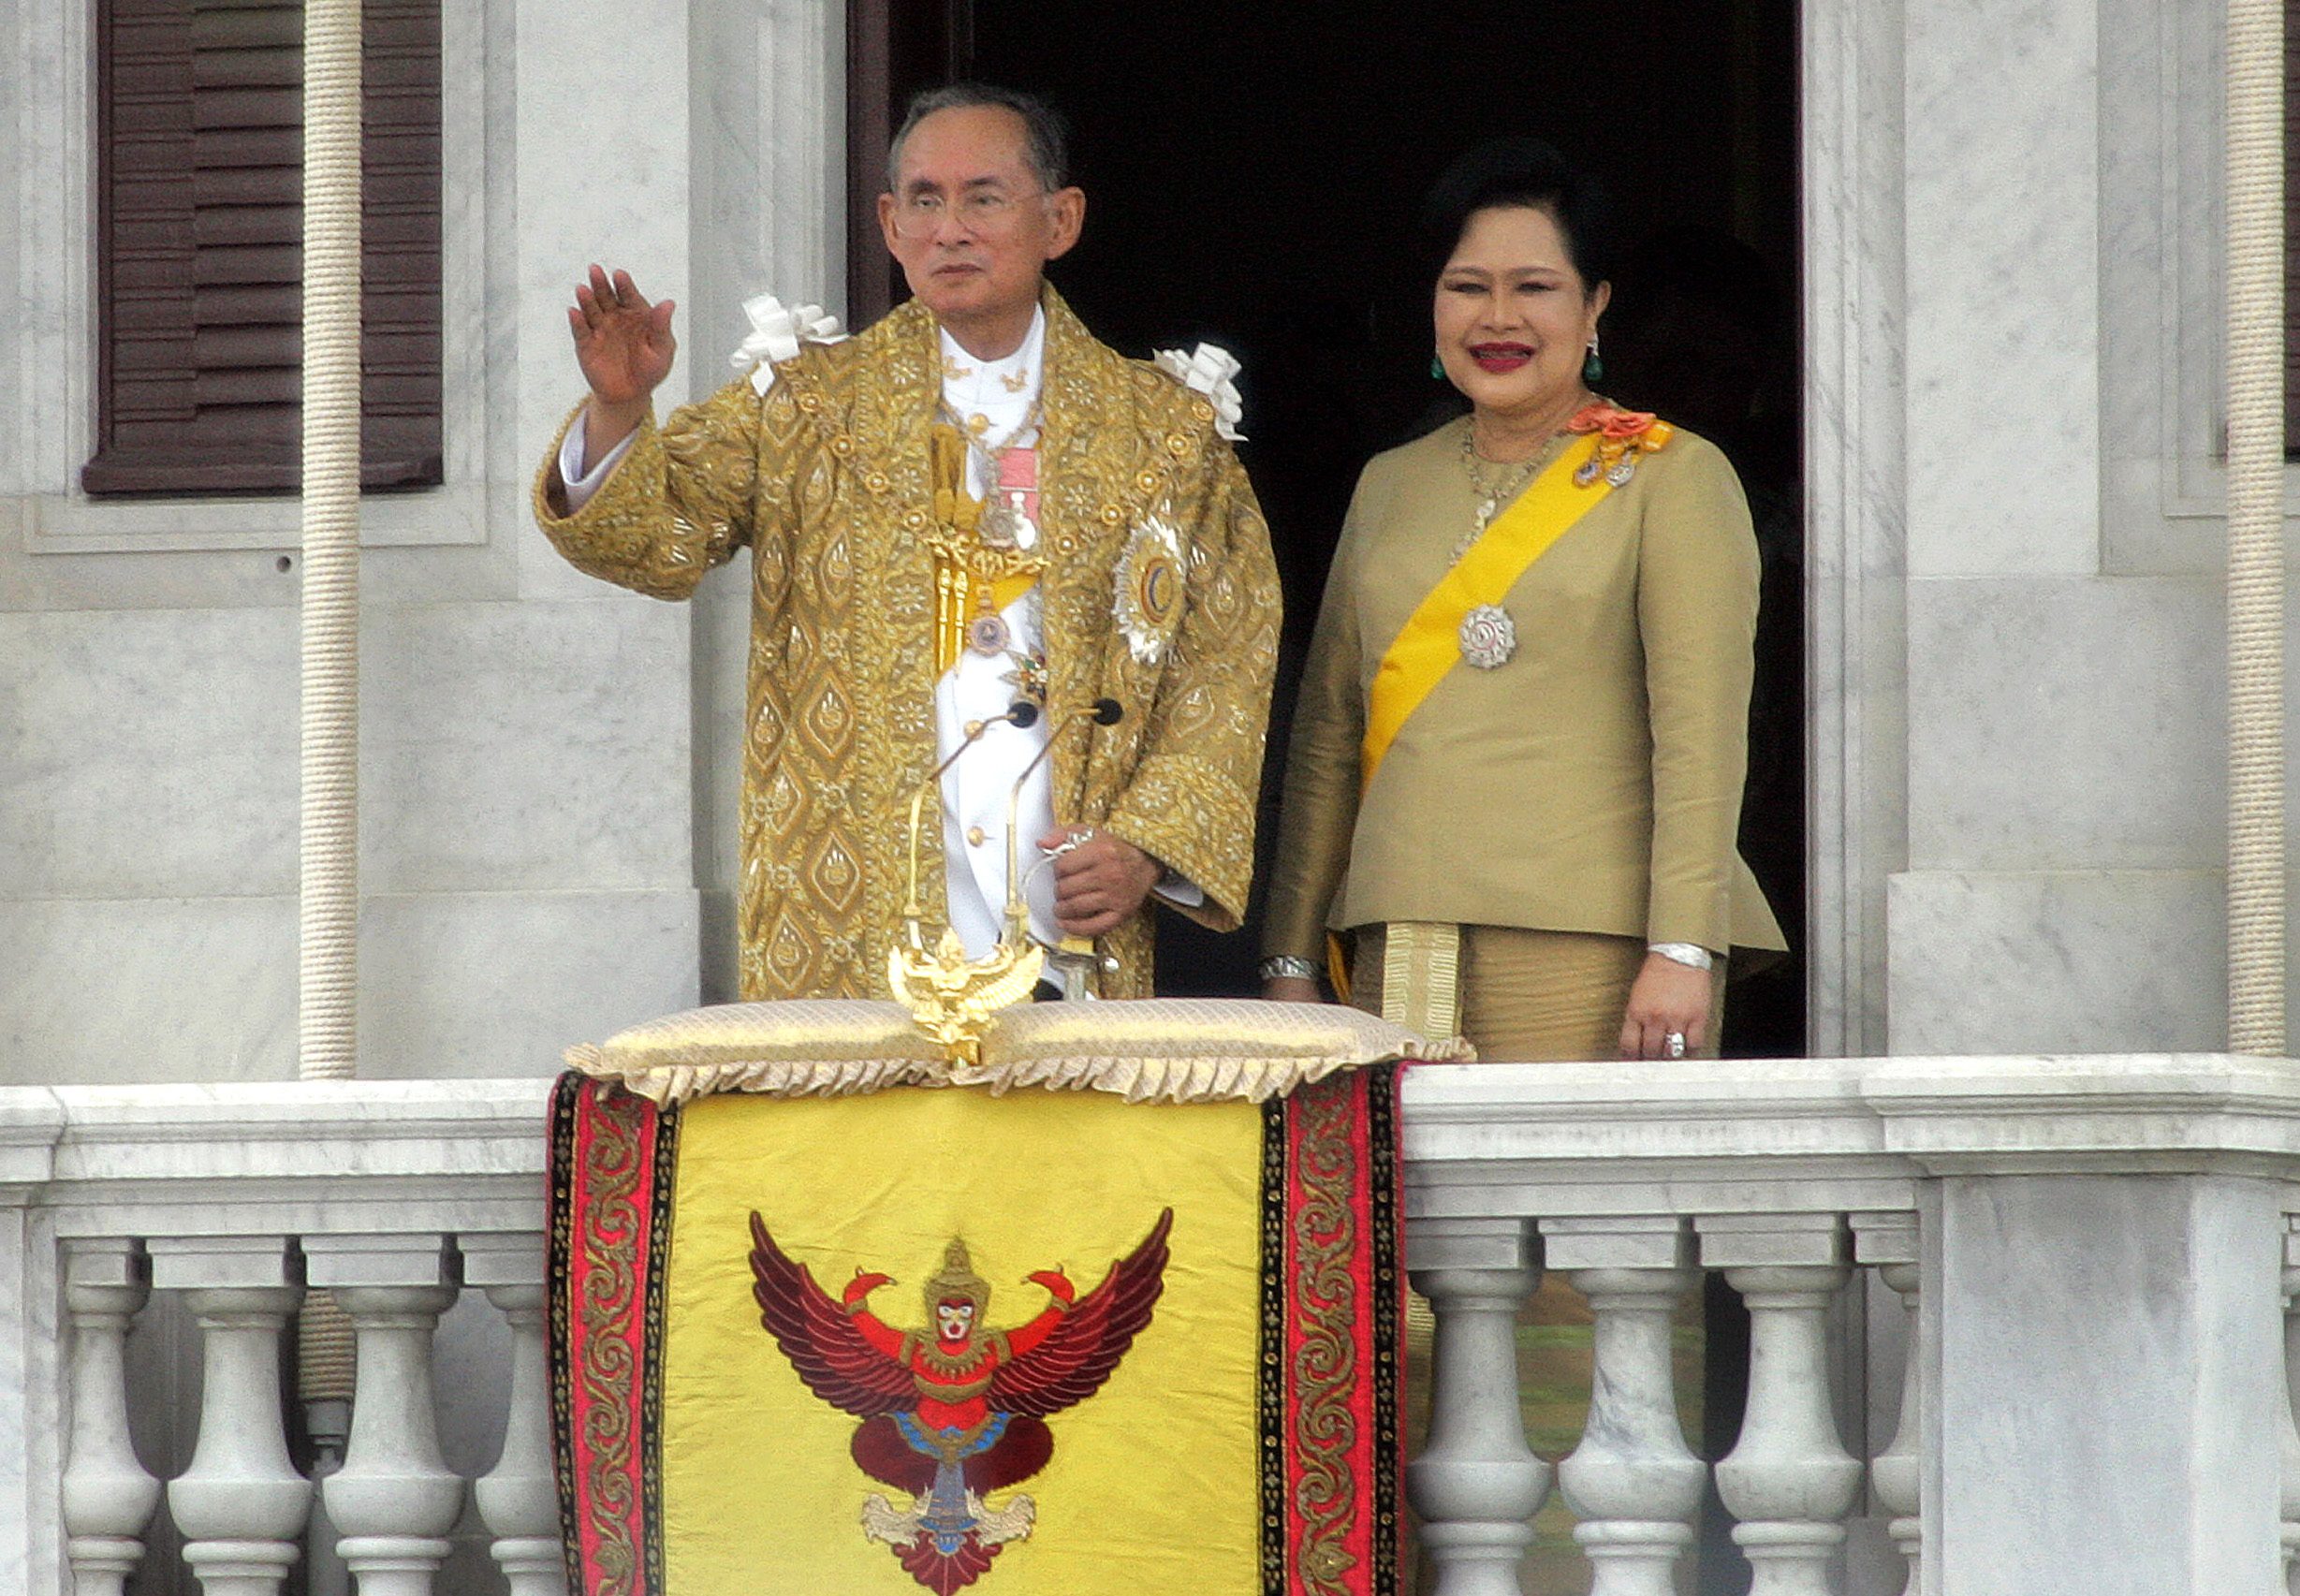 Thai King Bhumibol Adulyadej along with Queen Sirikit wave to thier people after his address in Bangkok, 09 June 2006. Nearly one million Thais wearing yellow shirts flocked into central Bangkok for the king's first public audience in six years, marking his 60th anniversary on the throne, police said. The king called for unity among his people after months of political turmoil, in a speech to mark his 60th anniversary on the throne. AFP PHOTO/PORNCHAI KITTIWONGSAKUL / AFP PHOTO / PORNCHAI KITTIWONGSAKUL